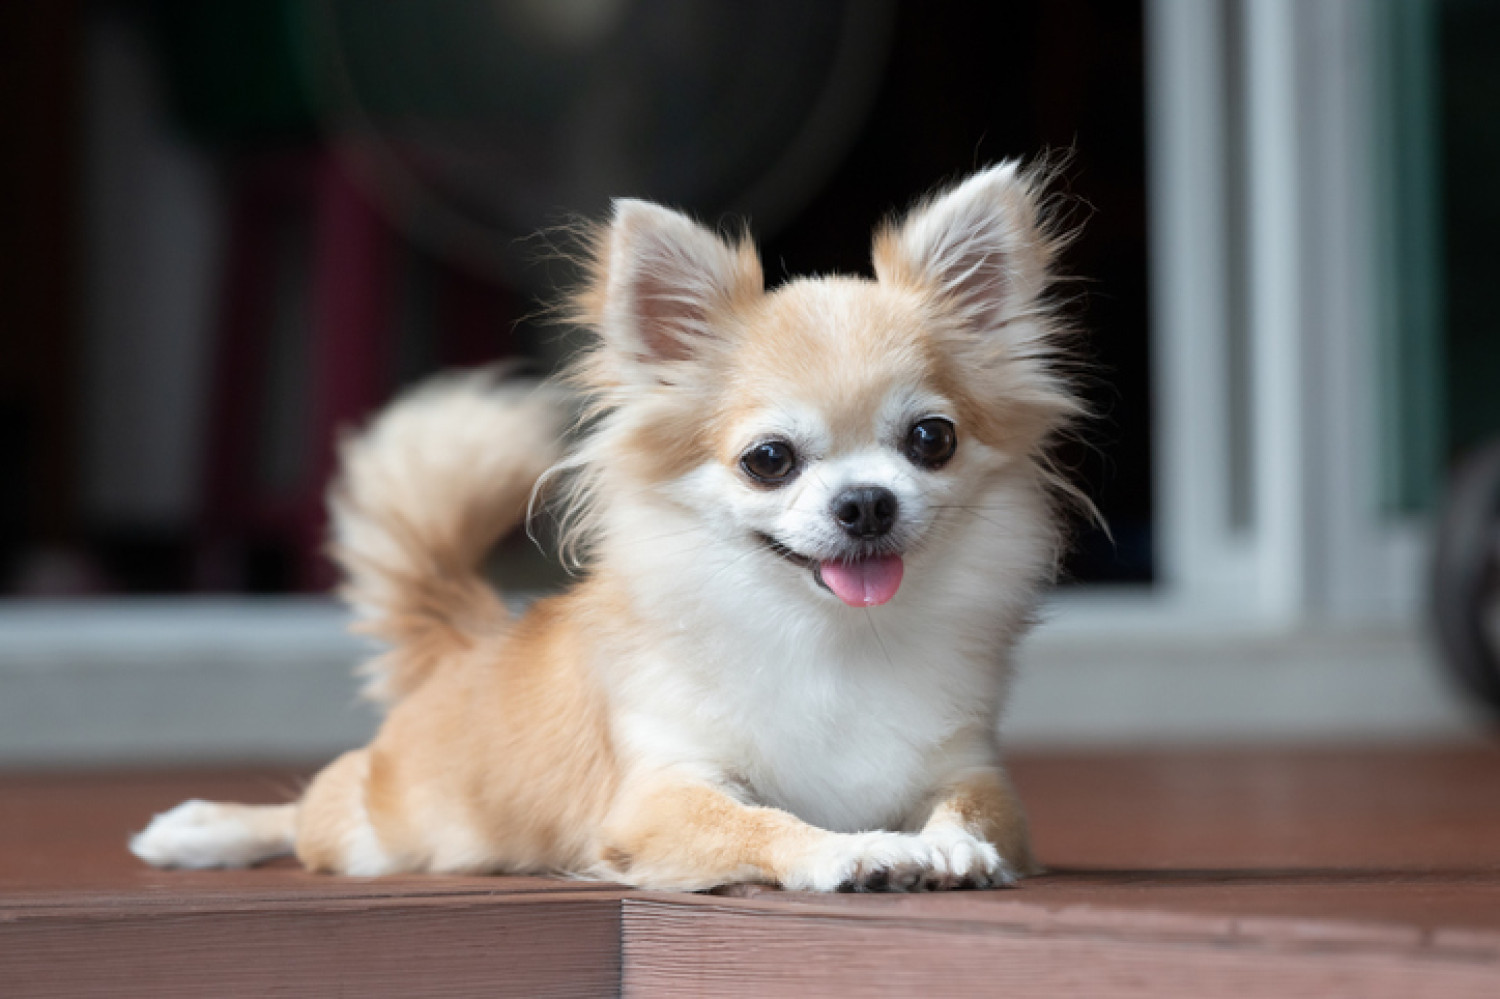 A small, alert Chihuahua with a fluffy golden coat lies on a wooden surface, representing a great pet option for dementia patients in compact living spaces.